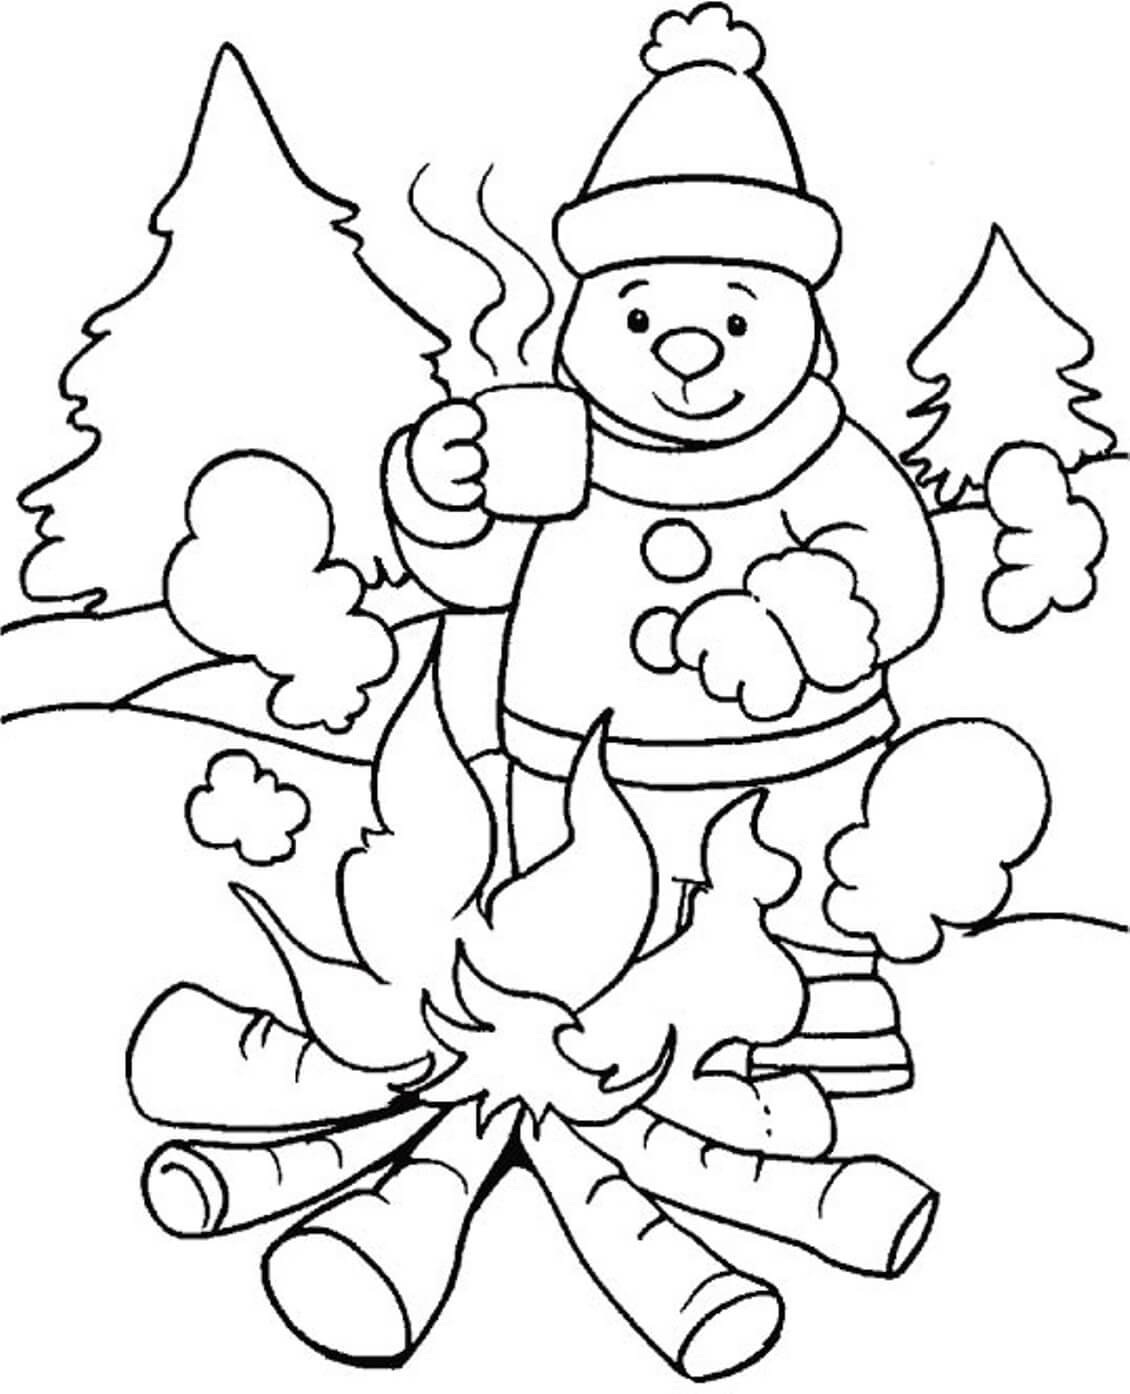 Download Free Printable Winter Coloring Pages